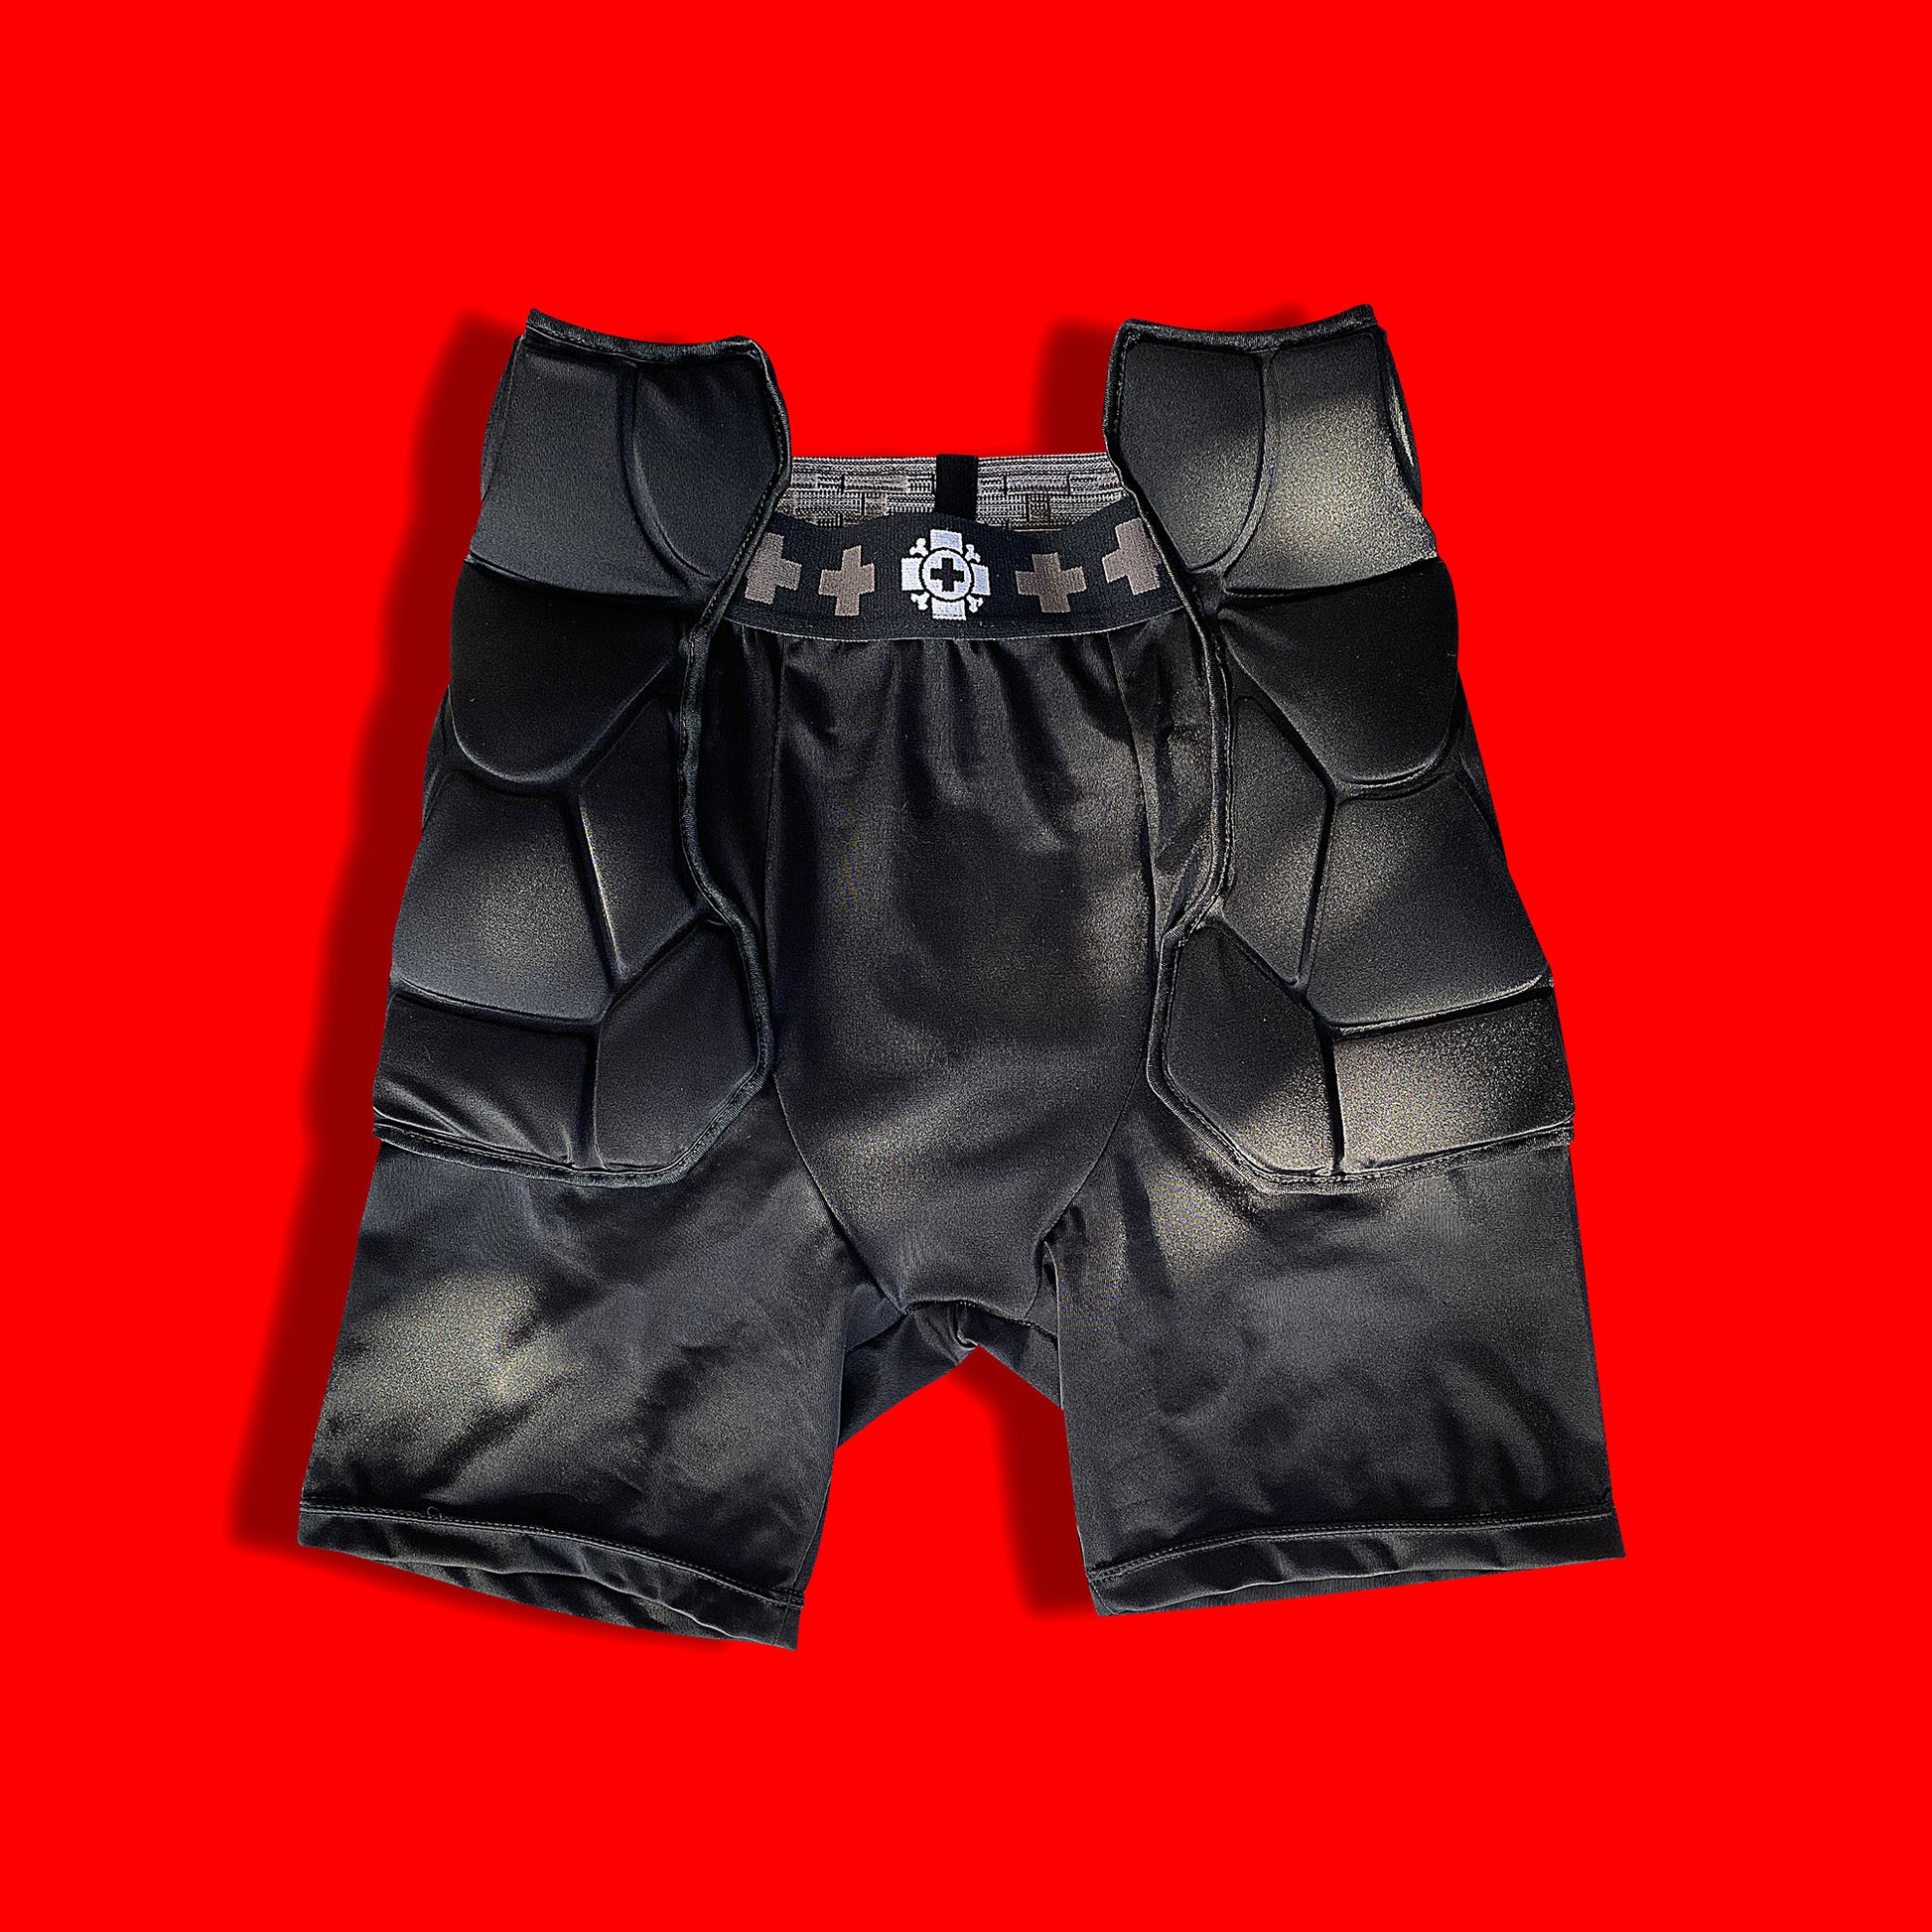 Shop Padded Compression Shorts For Basketball with great discounts